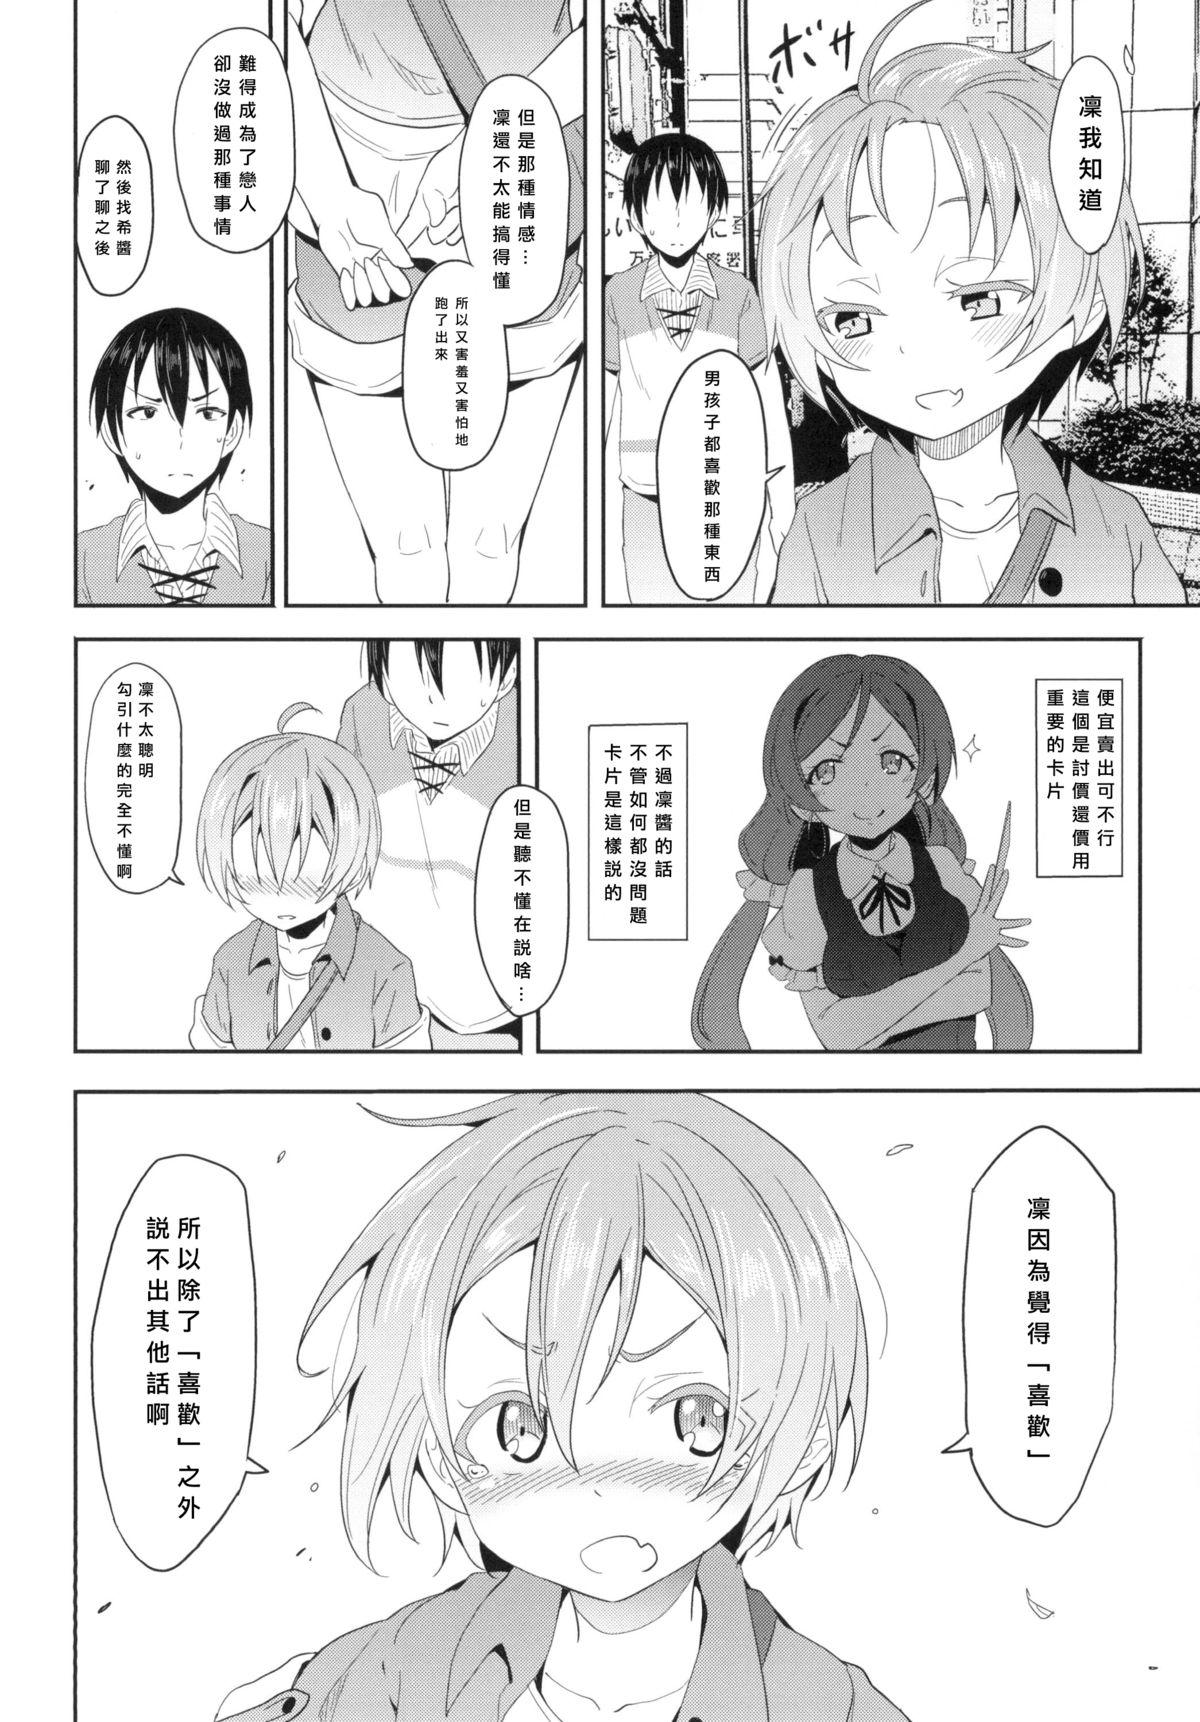 Reality Porn Rin-chan to Issho. - Love live Trans - Page 6